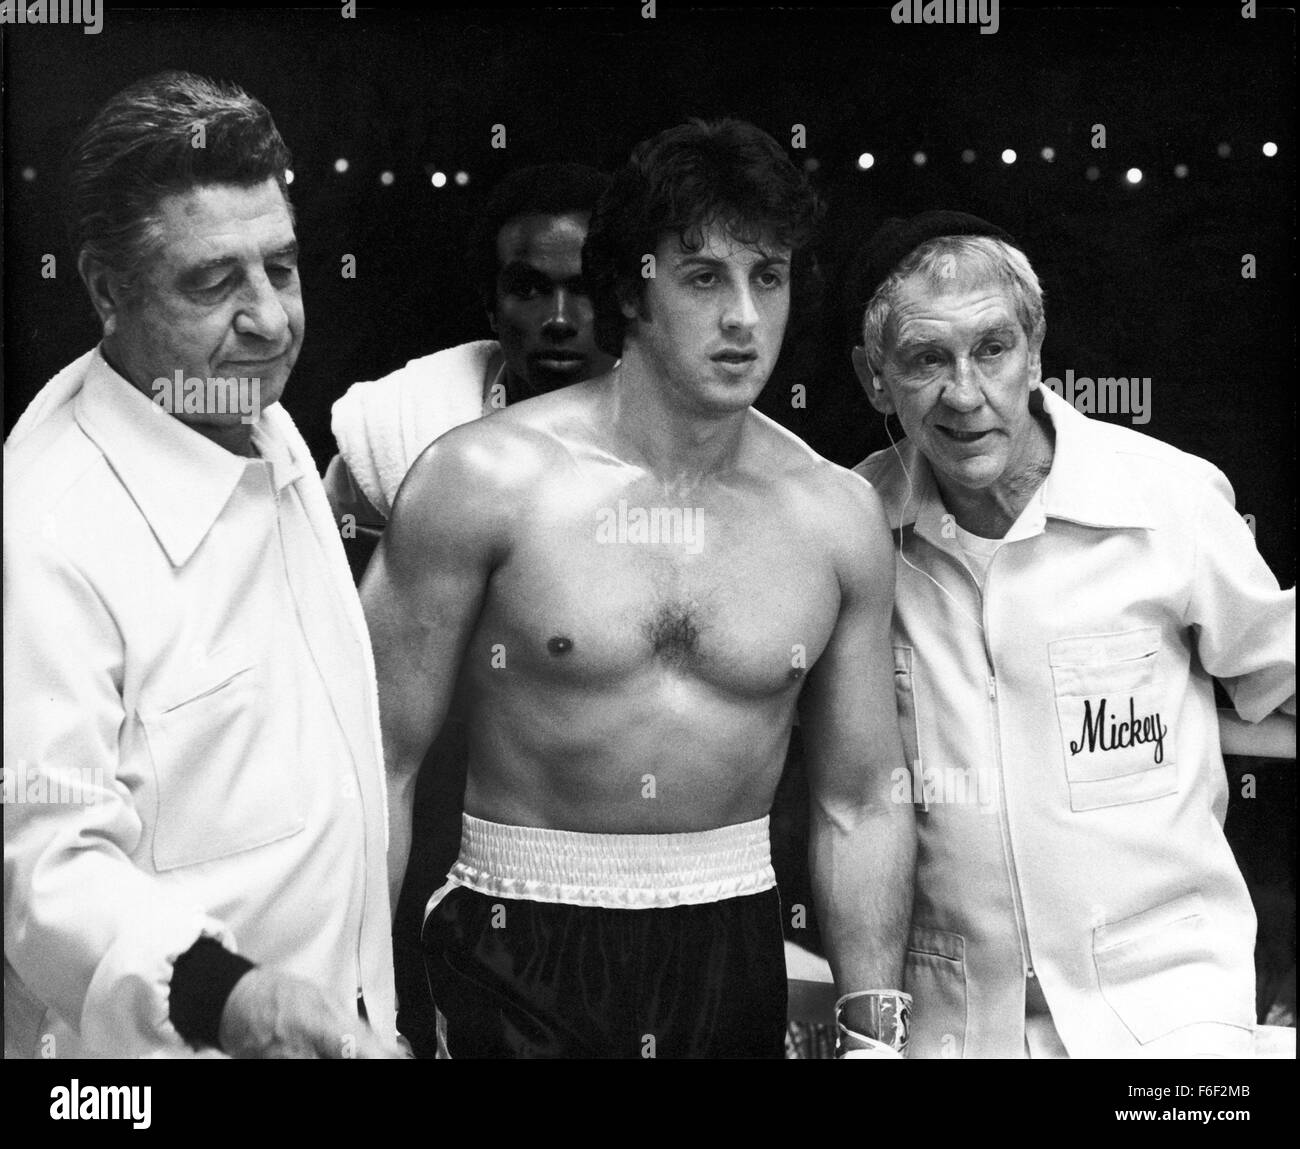 Jun 15, 1979; Philadelphia, PA, USA; SYLVESTER STALLONE (center) as Rocky Balboa and BURGESS MEREDITH (right) as Mickey Goldmill in the action, sport, drama 'Rocky II' directed by Sylvester Stallone. Stock Photo